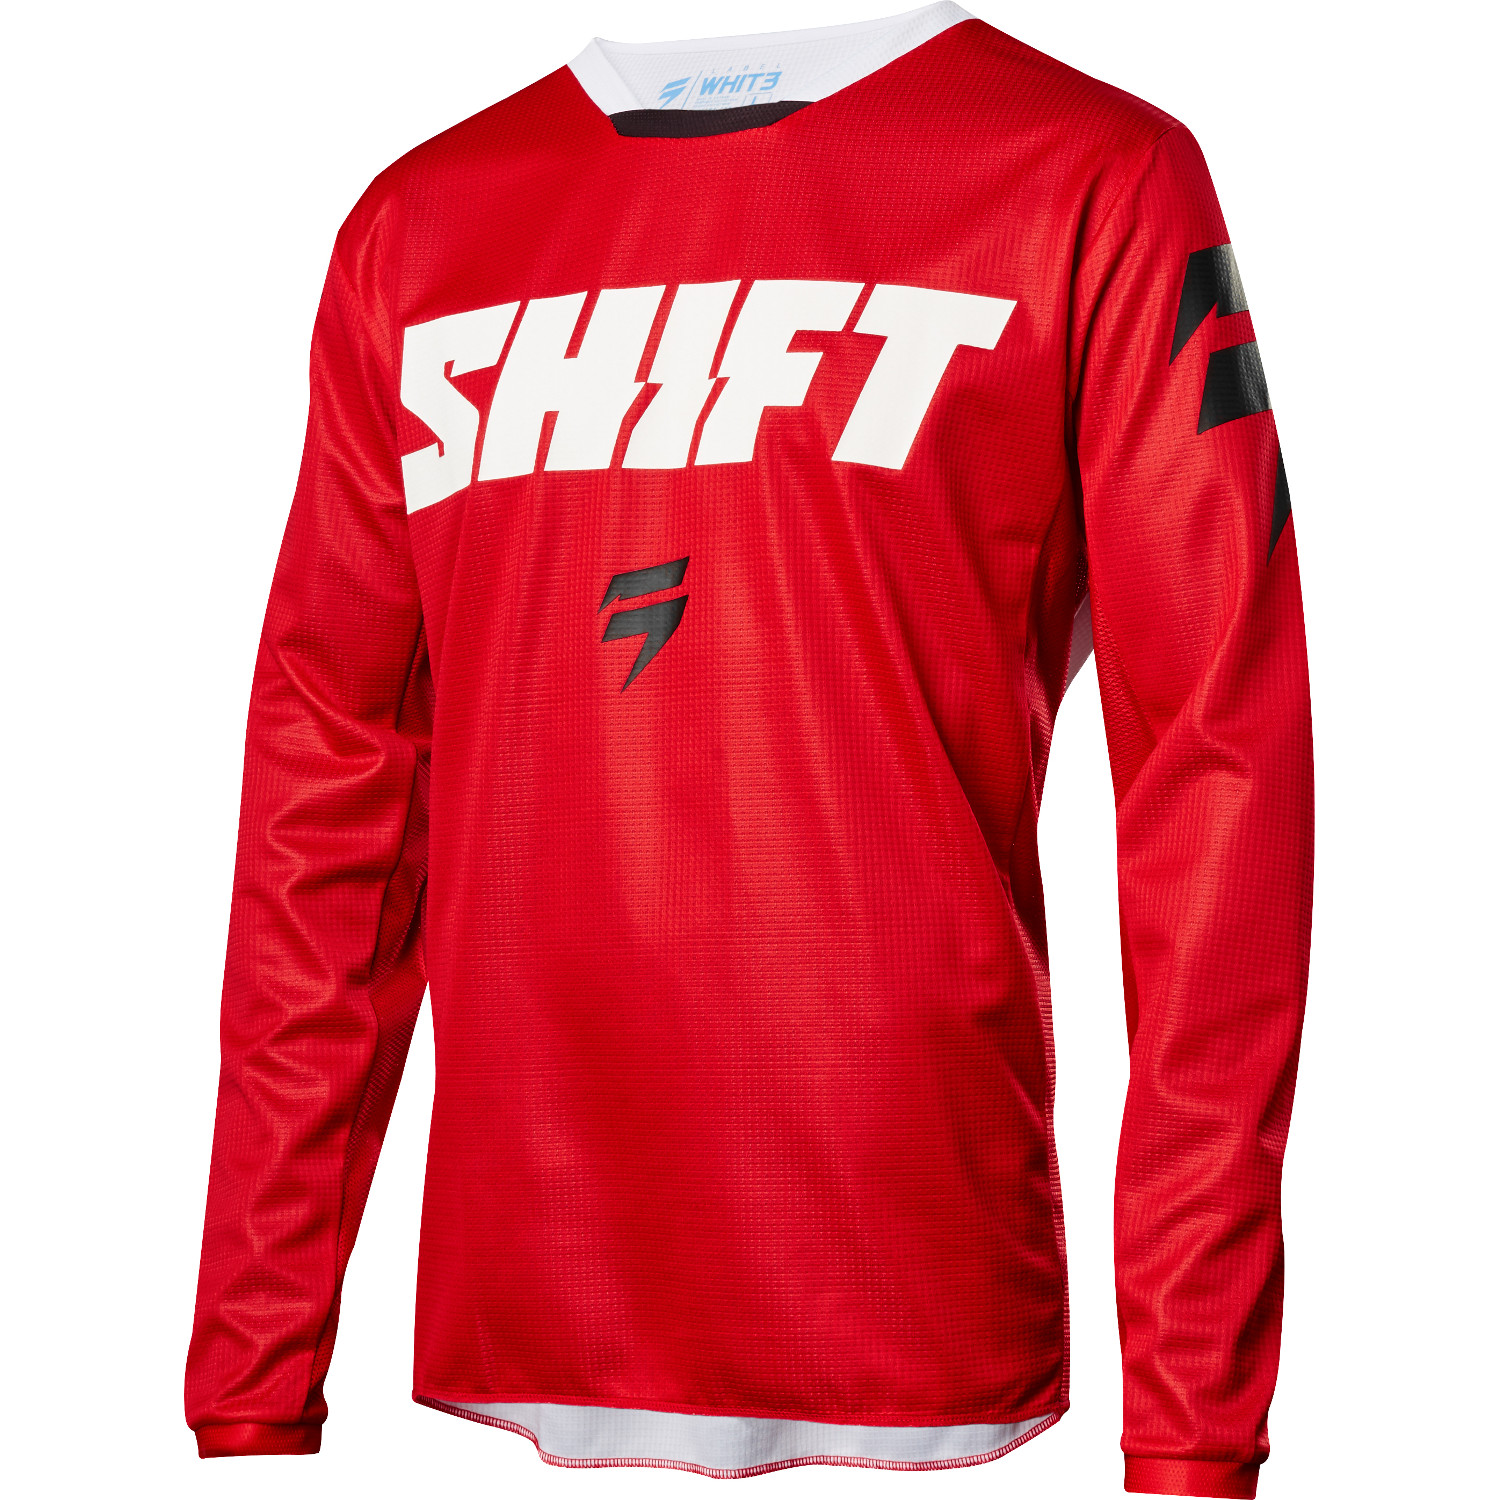 Shift Jersey Whit3 Label Ninety Seven - Red